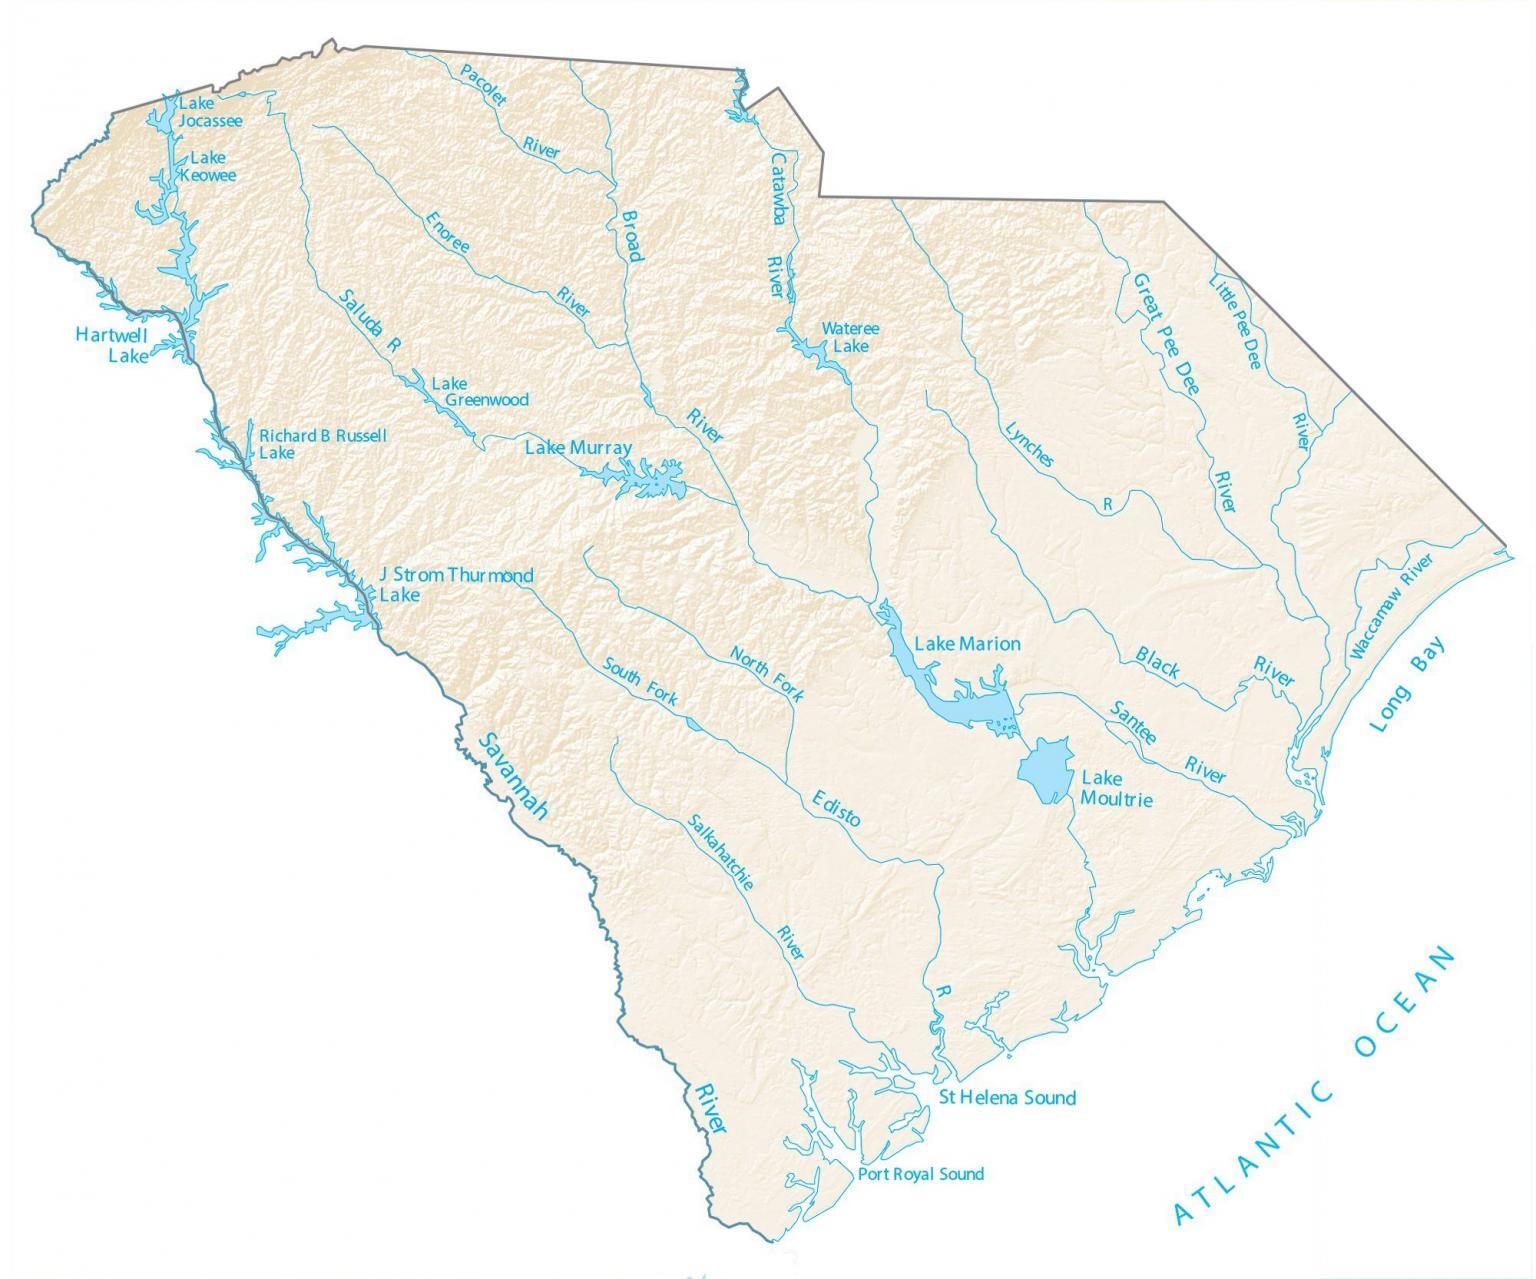 what river is the capital of south carolina located on